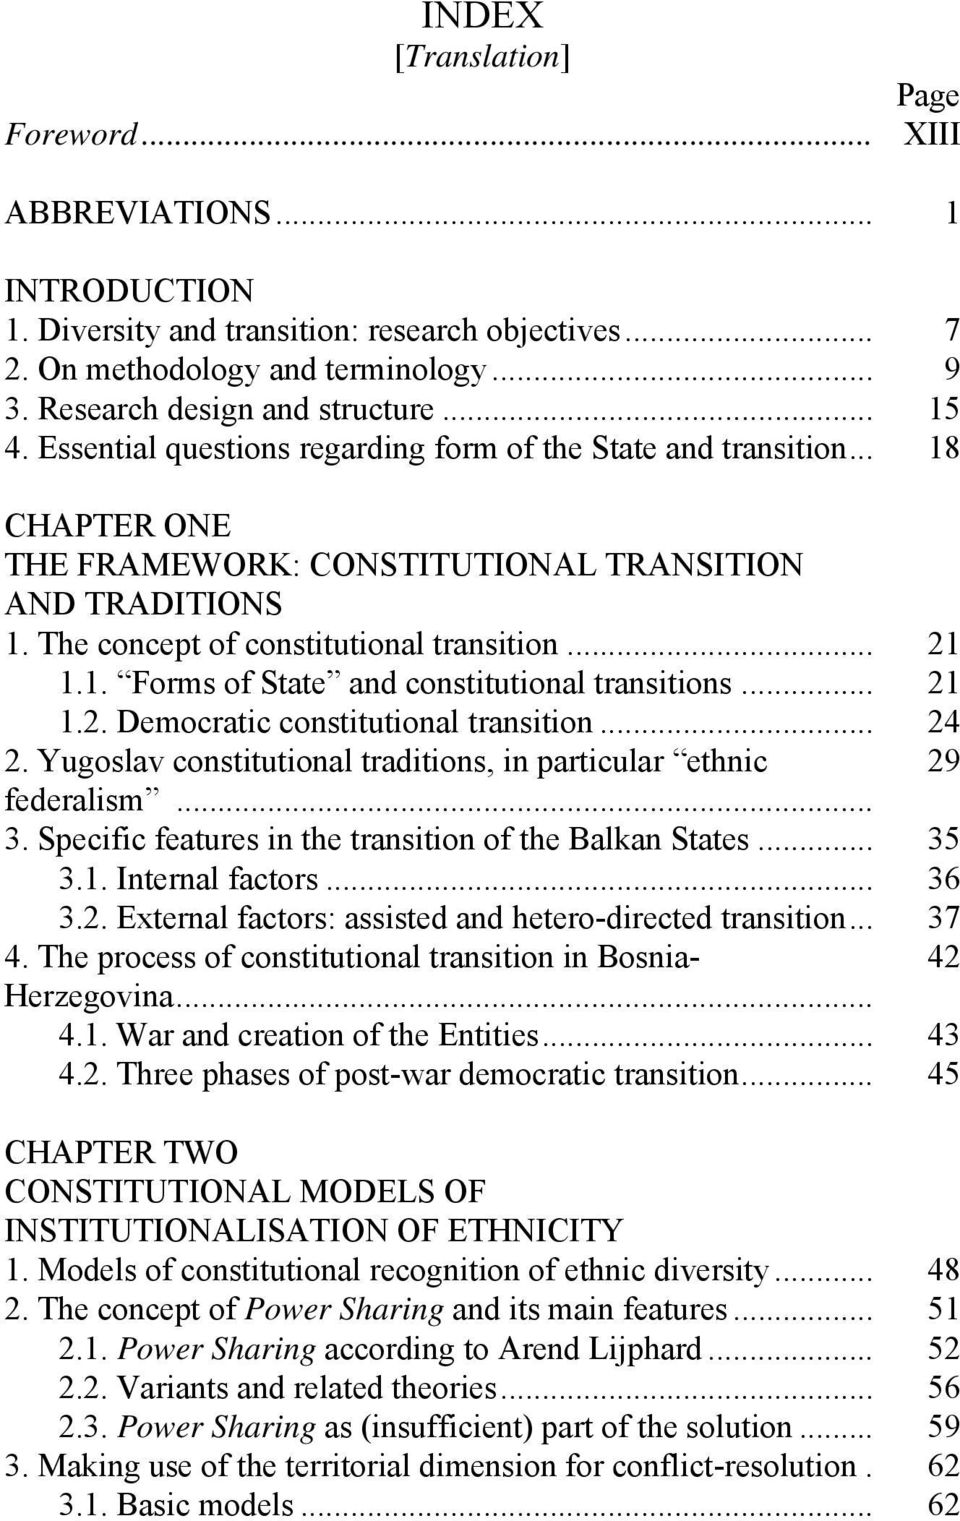 .. 21 1.2. Democratic constitutional transition... 24 2. Yugoslav constitutional traditions, in particular ethnic 29 federalism... 3. Specific features in the transition of the Balkan States... 35 3.